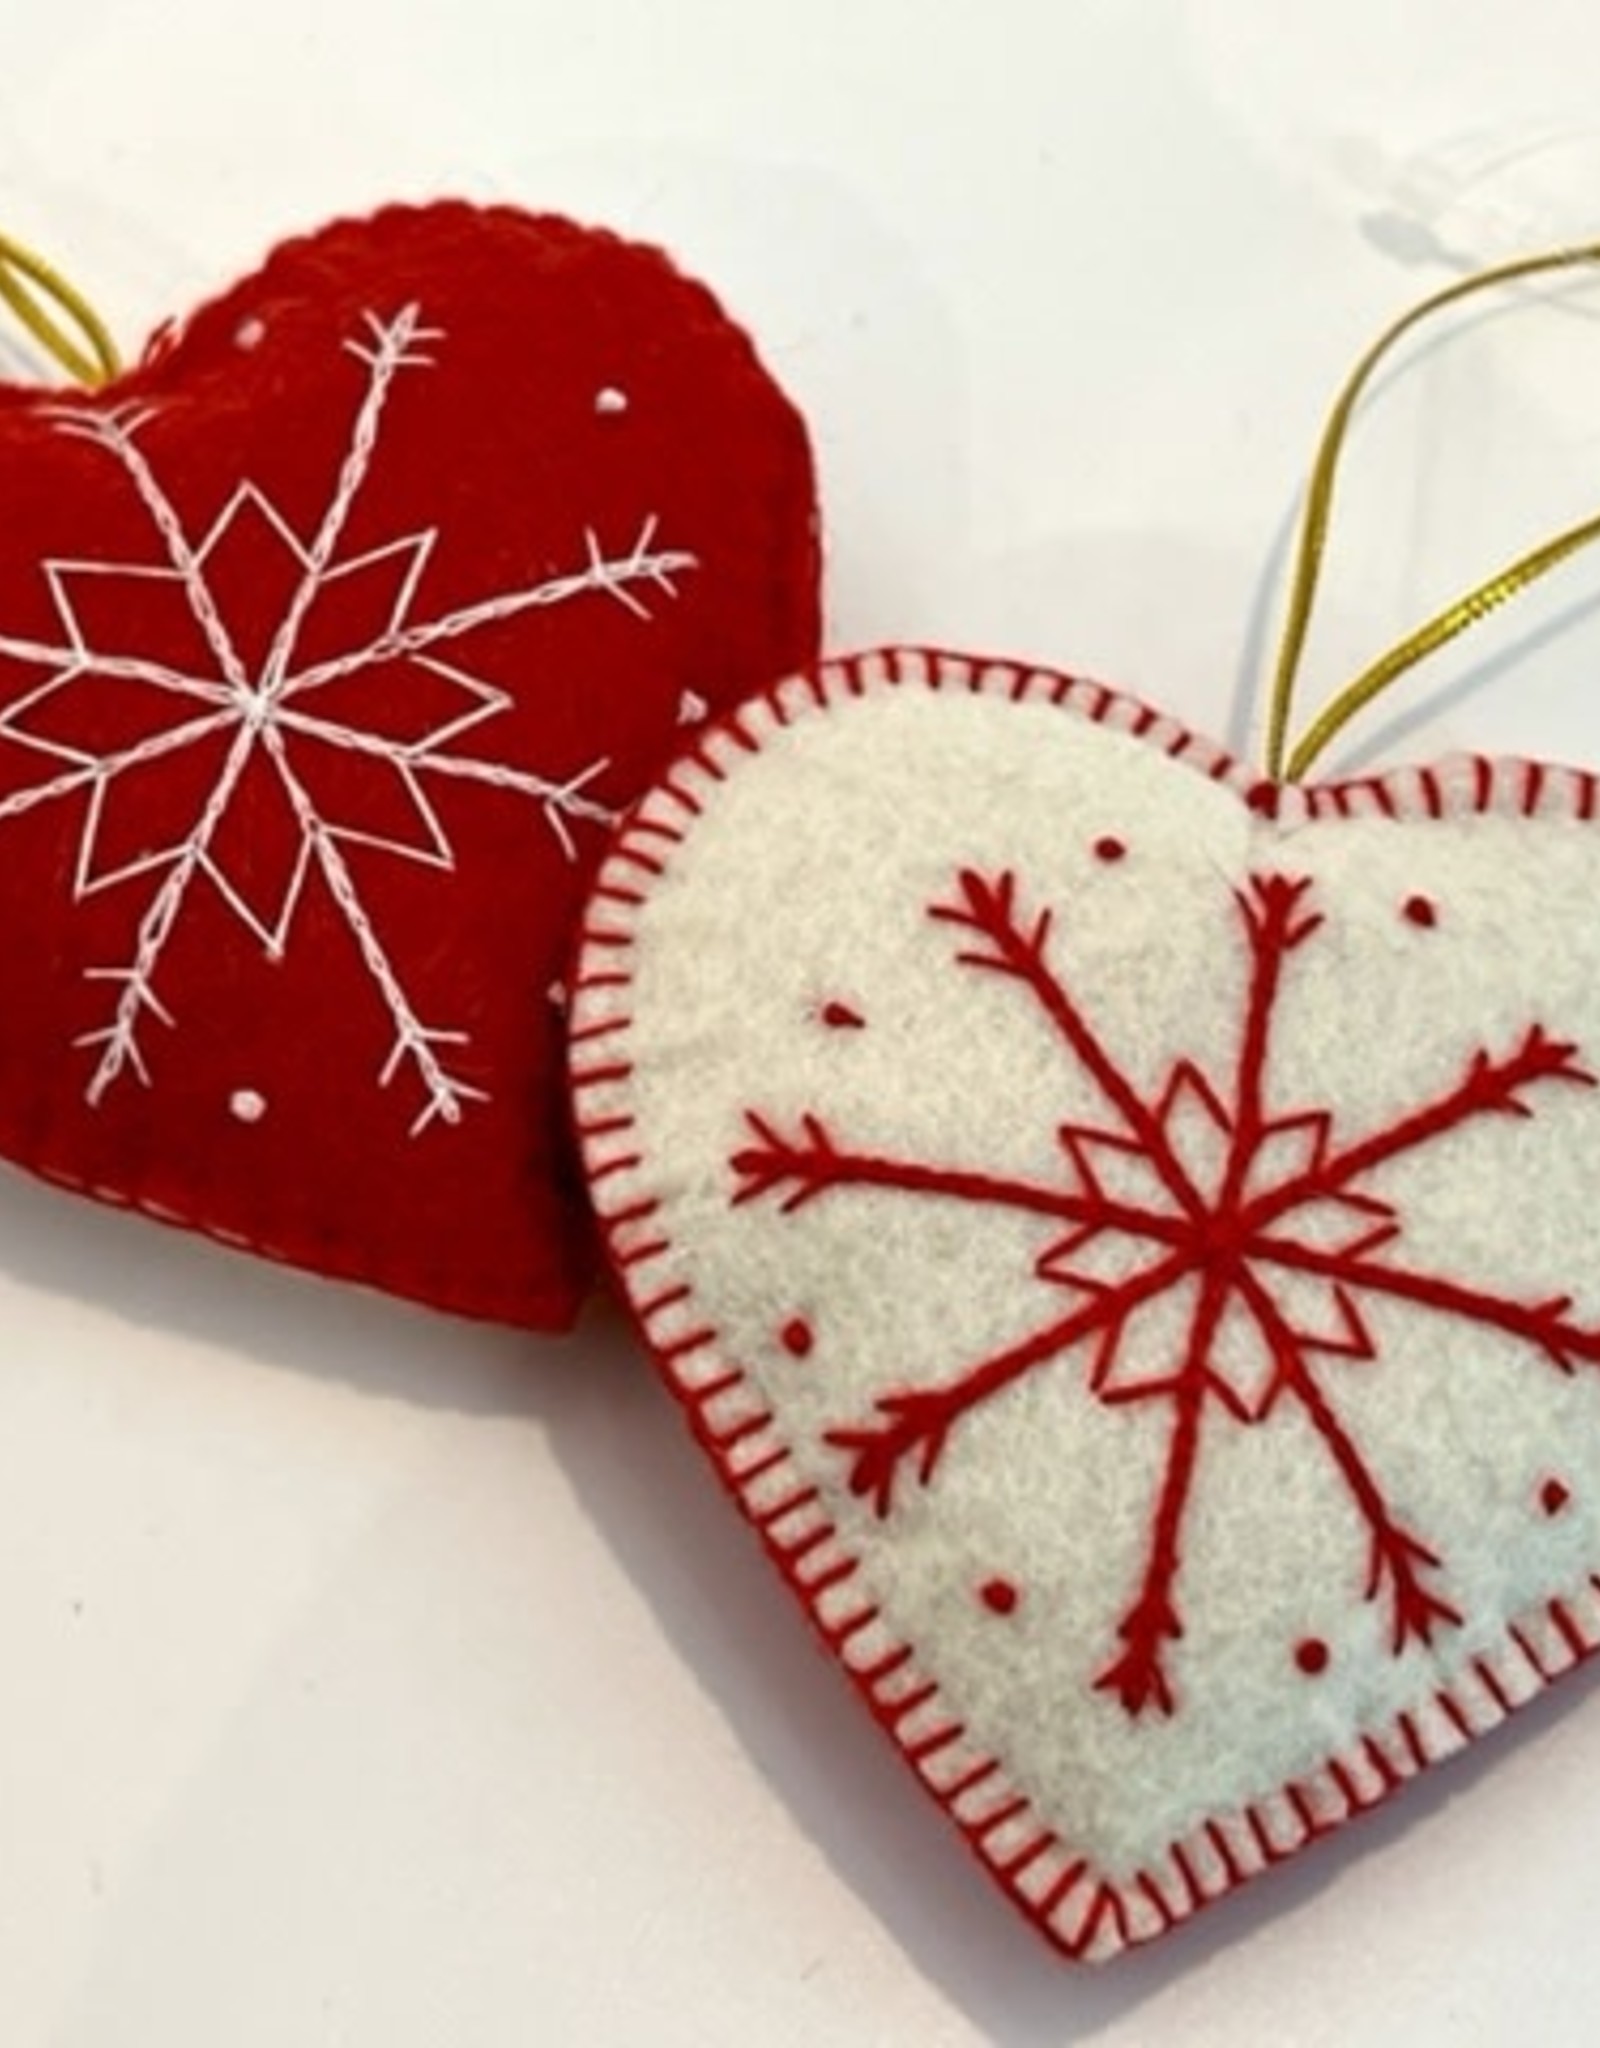 J127 Ranch Reversible Red and White Heart Ornament